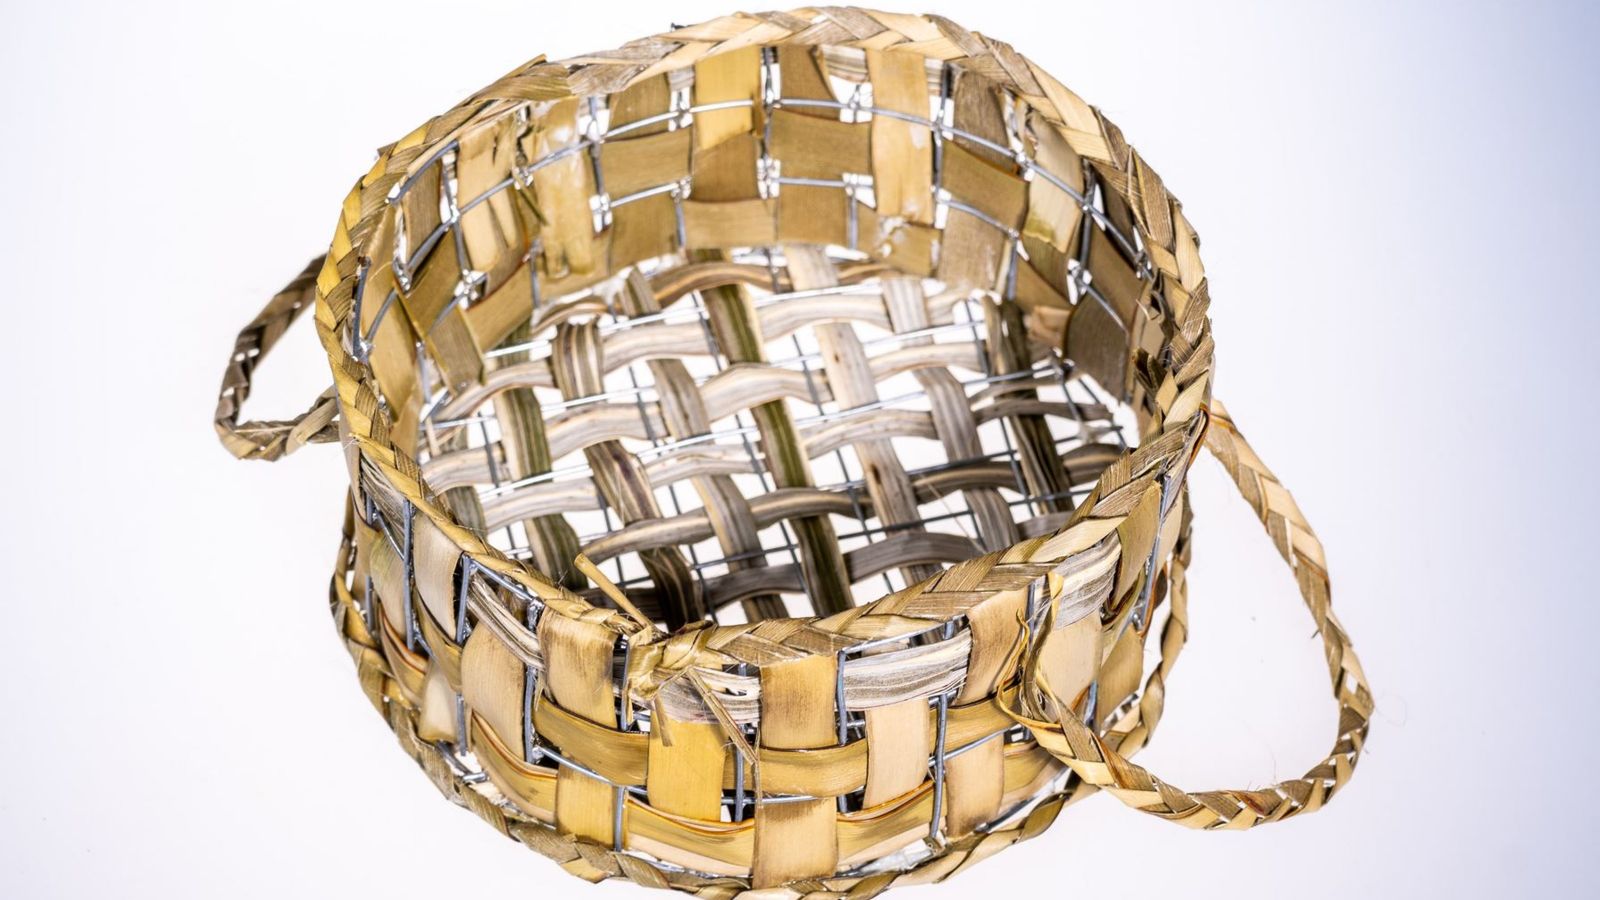 image of a woven basket